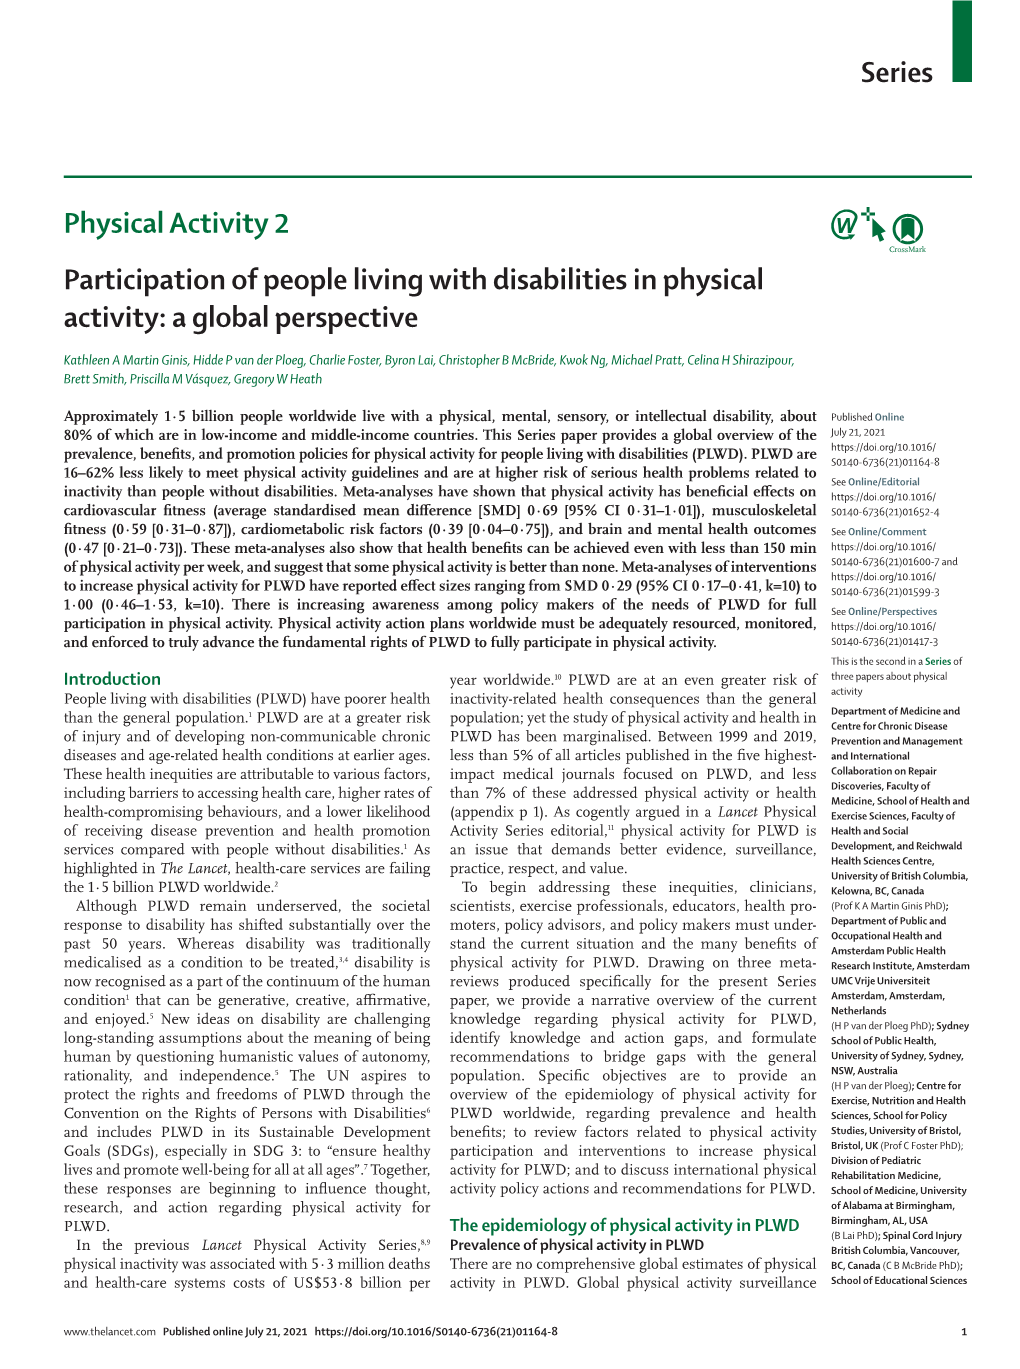 Participation of People Living with Disabilities in Physical Activity: a Global Perspective